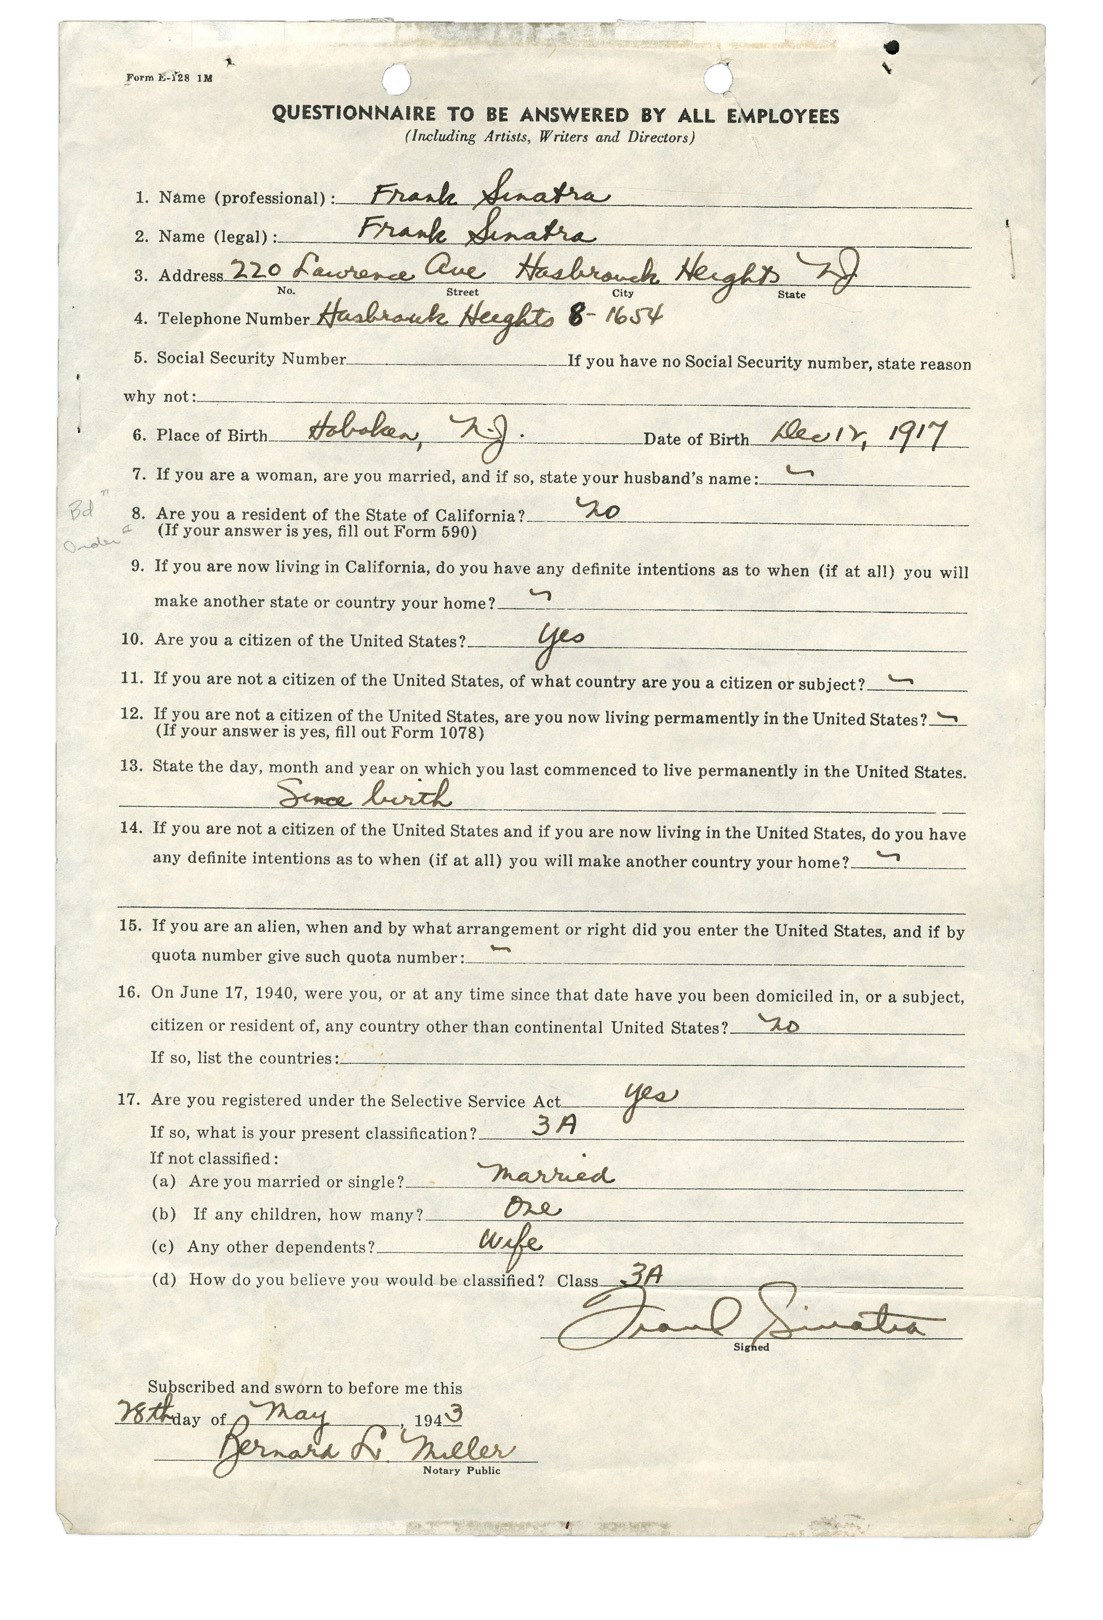 Rock And Pop Culture - 1943 Frank Sinatra Columbia Records Employee Questionnaire - Four Days Before Signing (JSA)